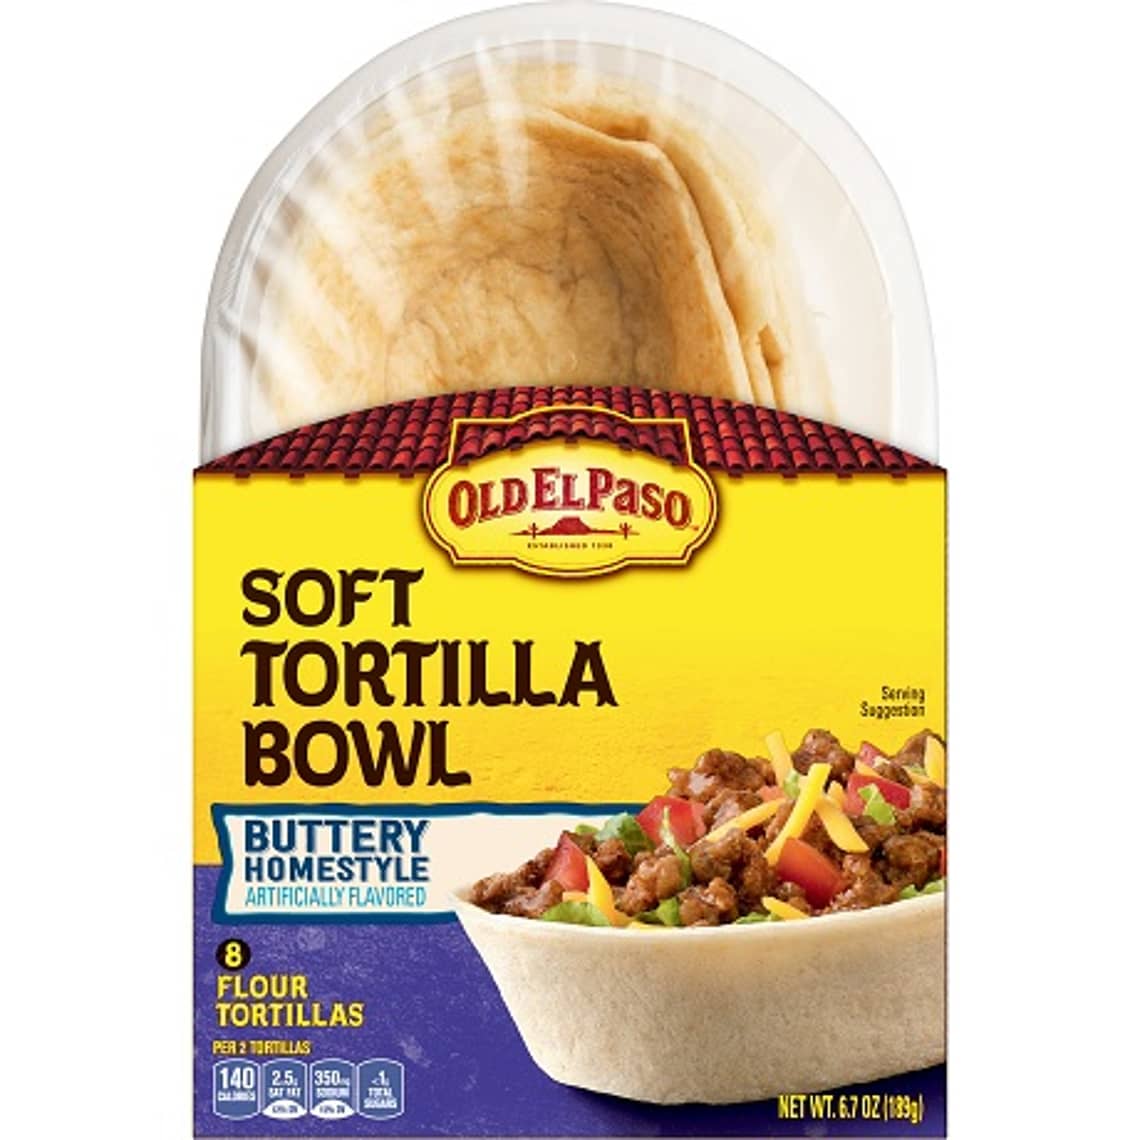 Old El Paso Buttery Homestyle Soft Tortilla Bowls 8 Count